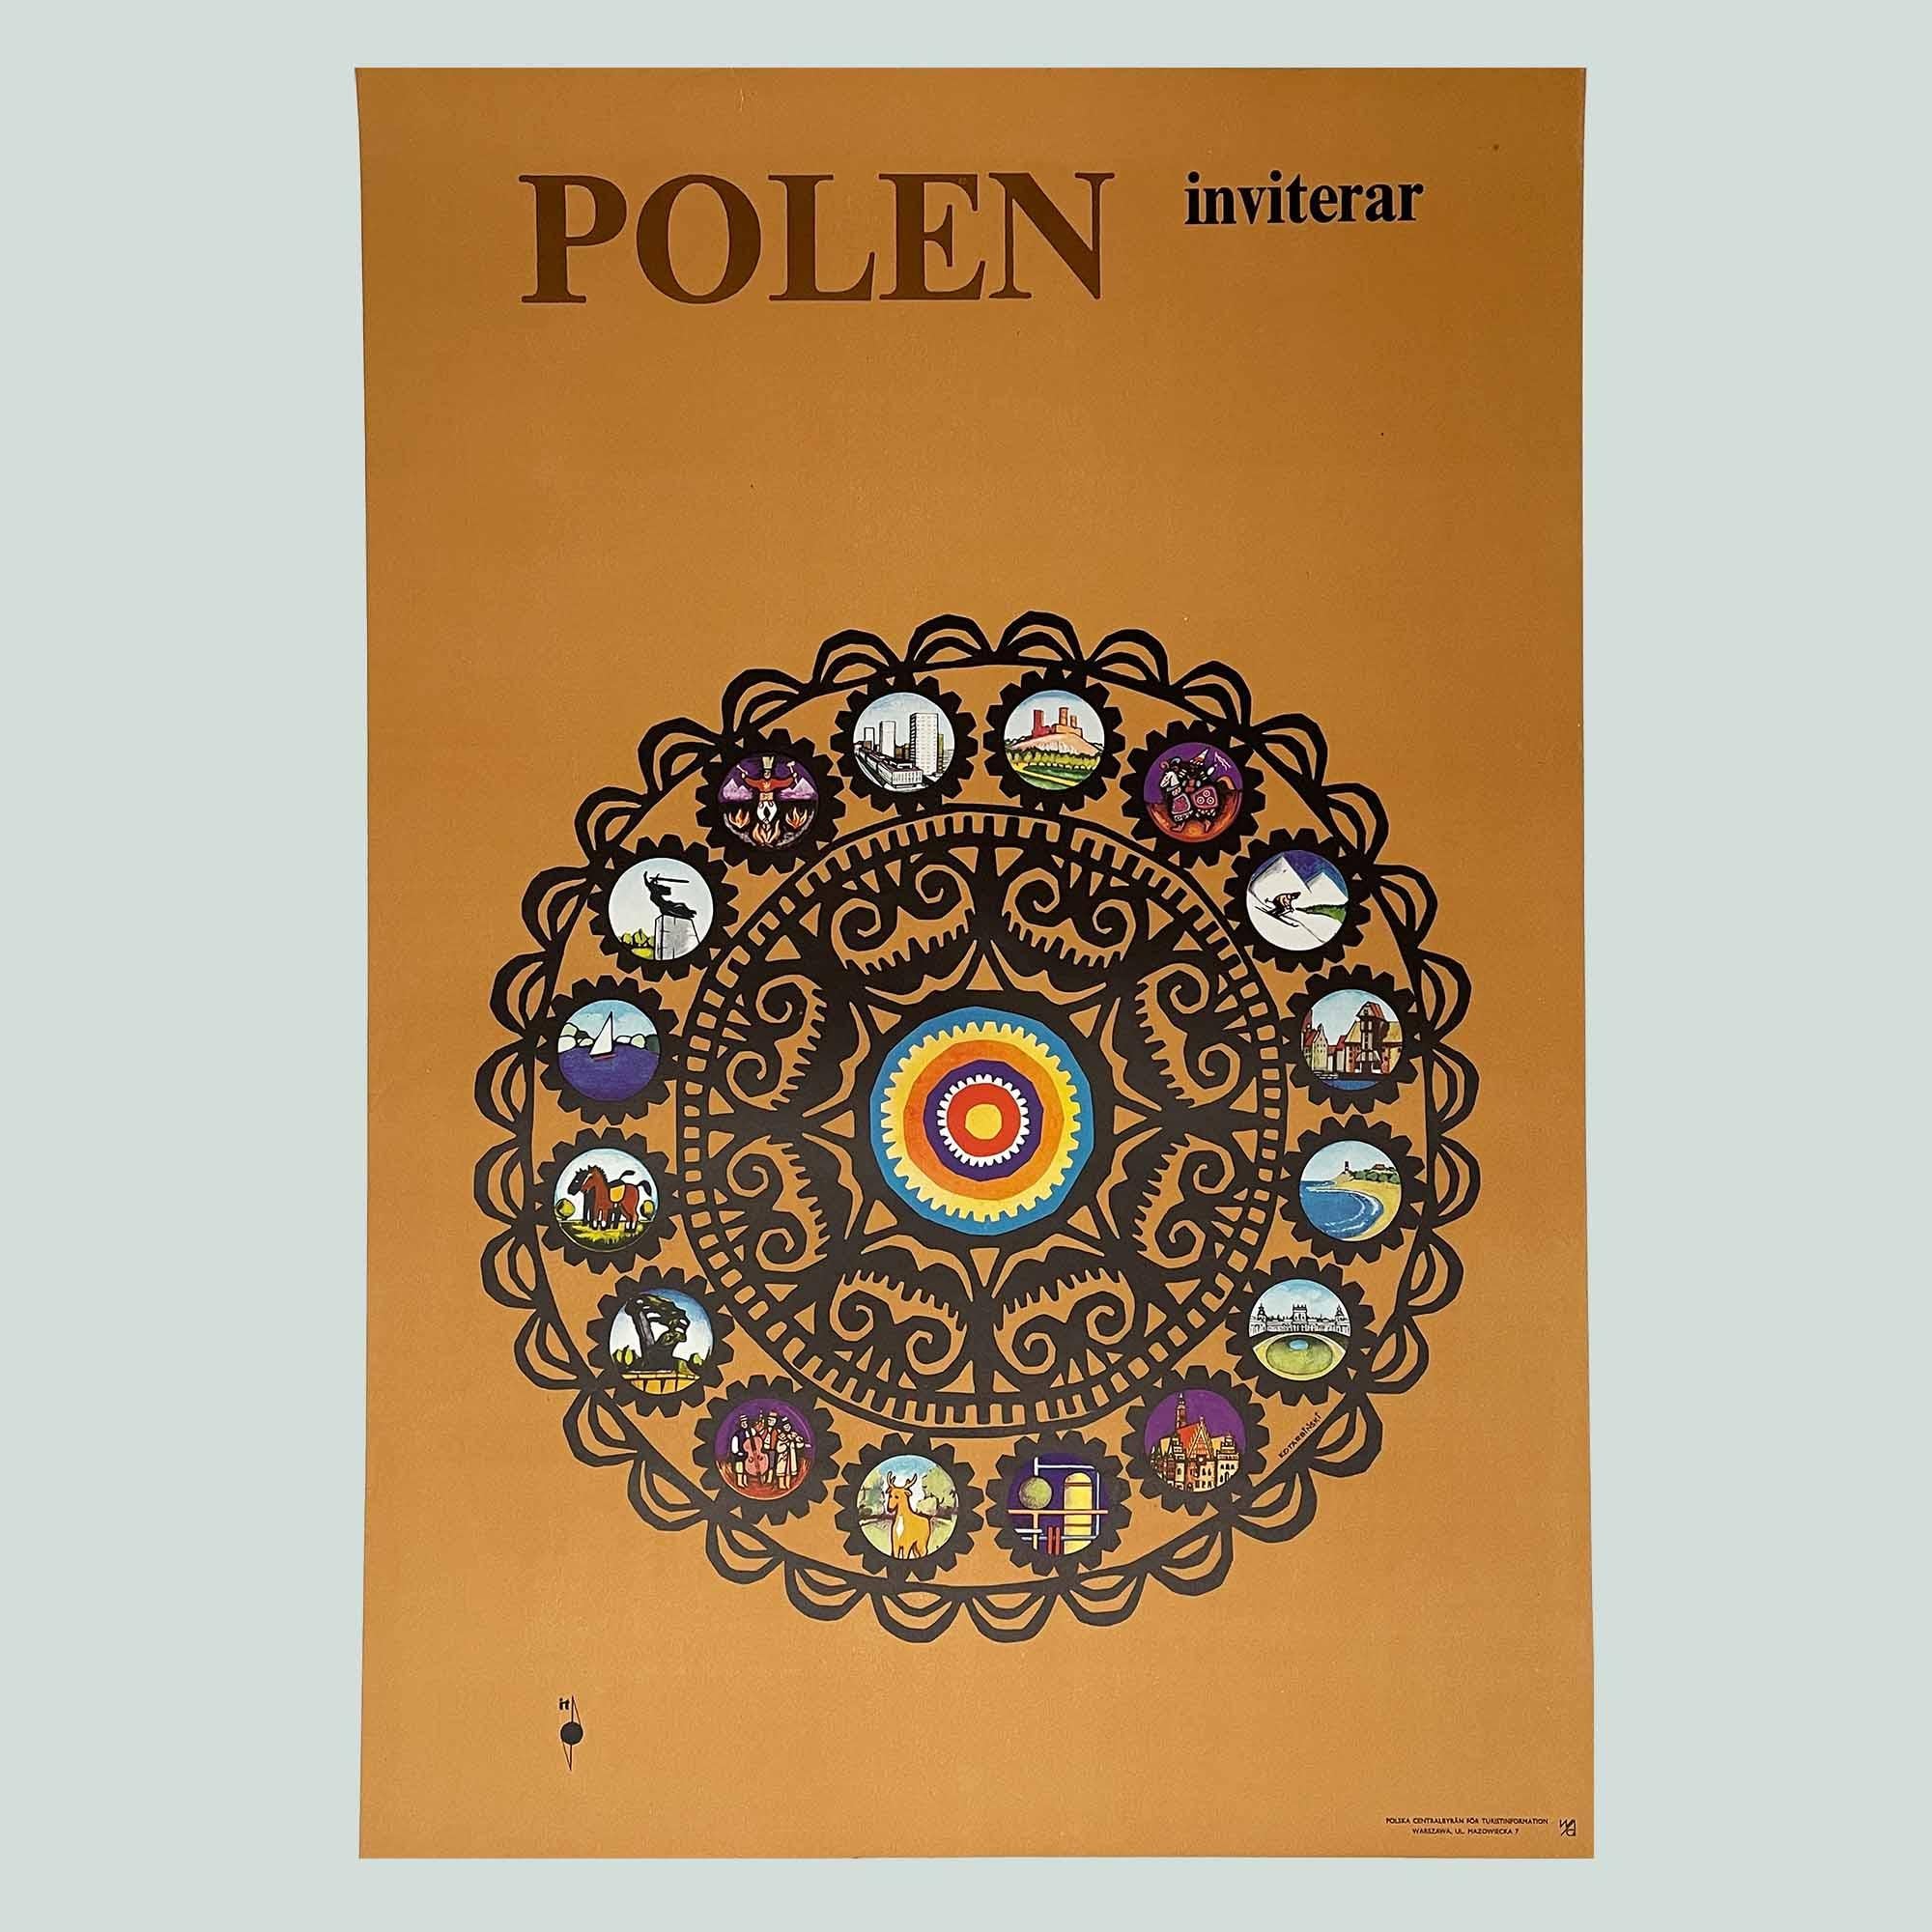 Exquisite and intricately illustrated Polish tourist poster from the 1960s, designed by Polish artist Jan Kotarbinski. Polen Inviterar translates as ‘Poland Invites You’.

Polish B1 size: 67 x 97.5 cm

Condition: excellent